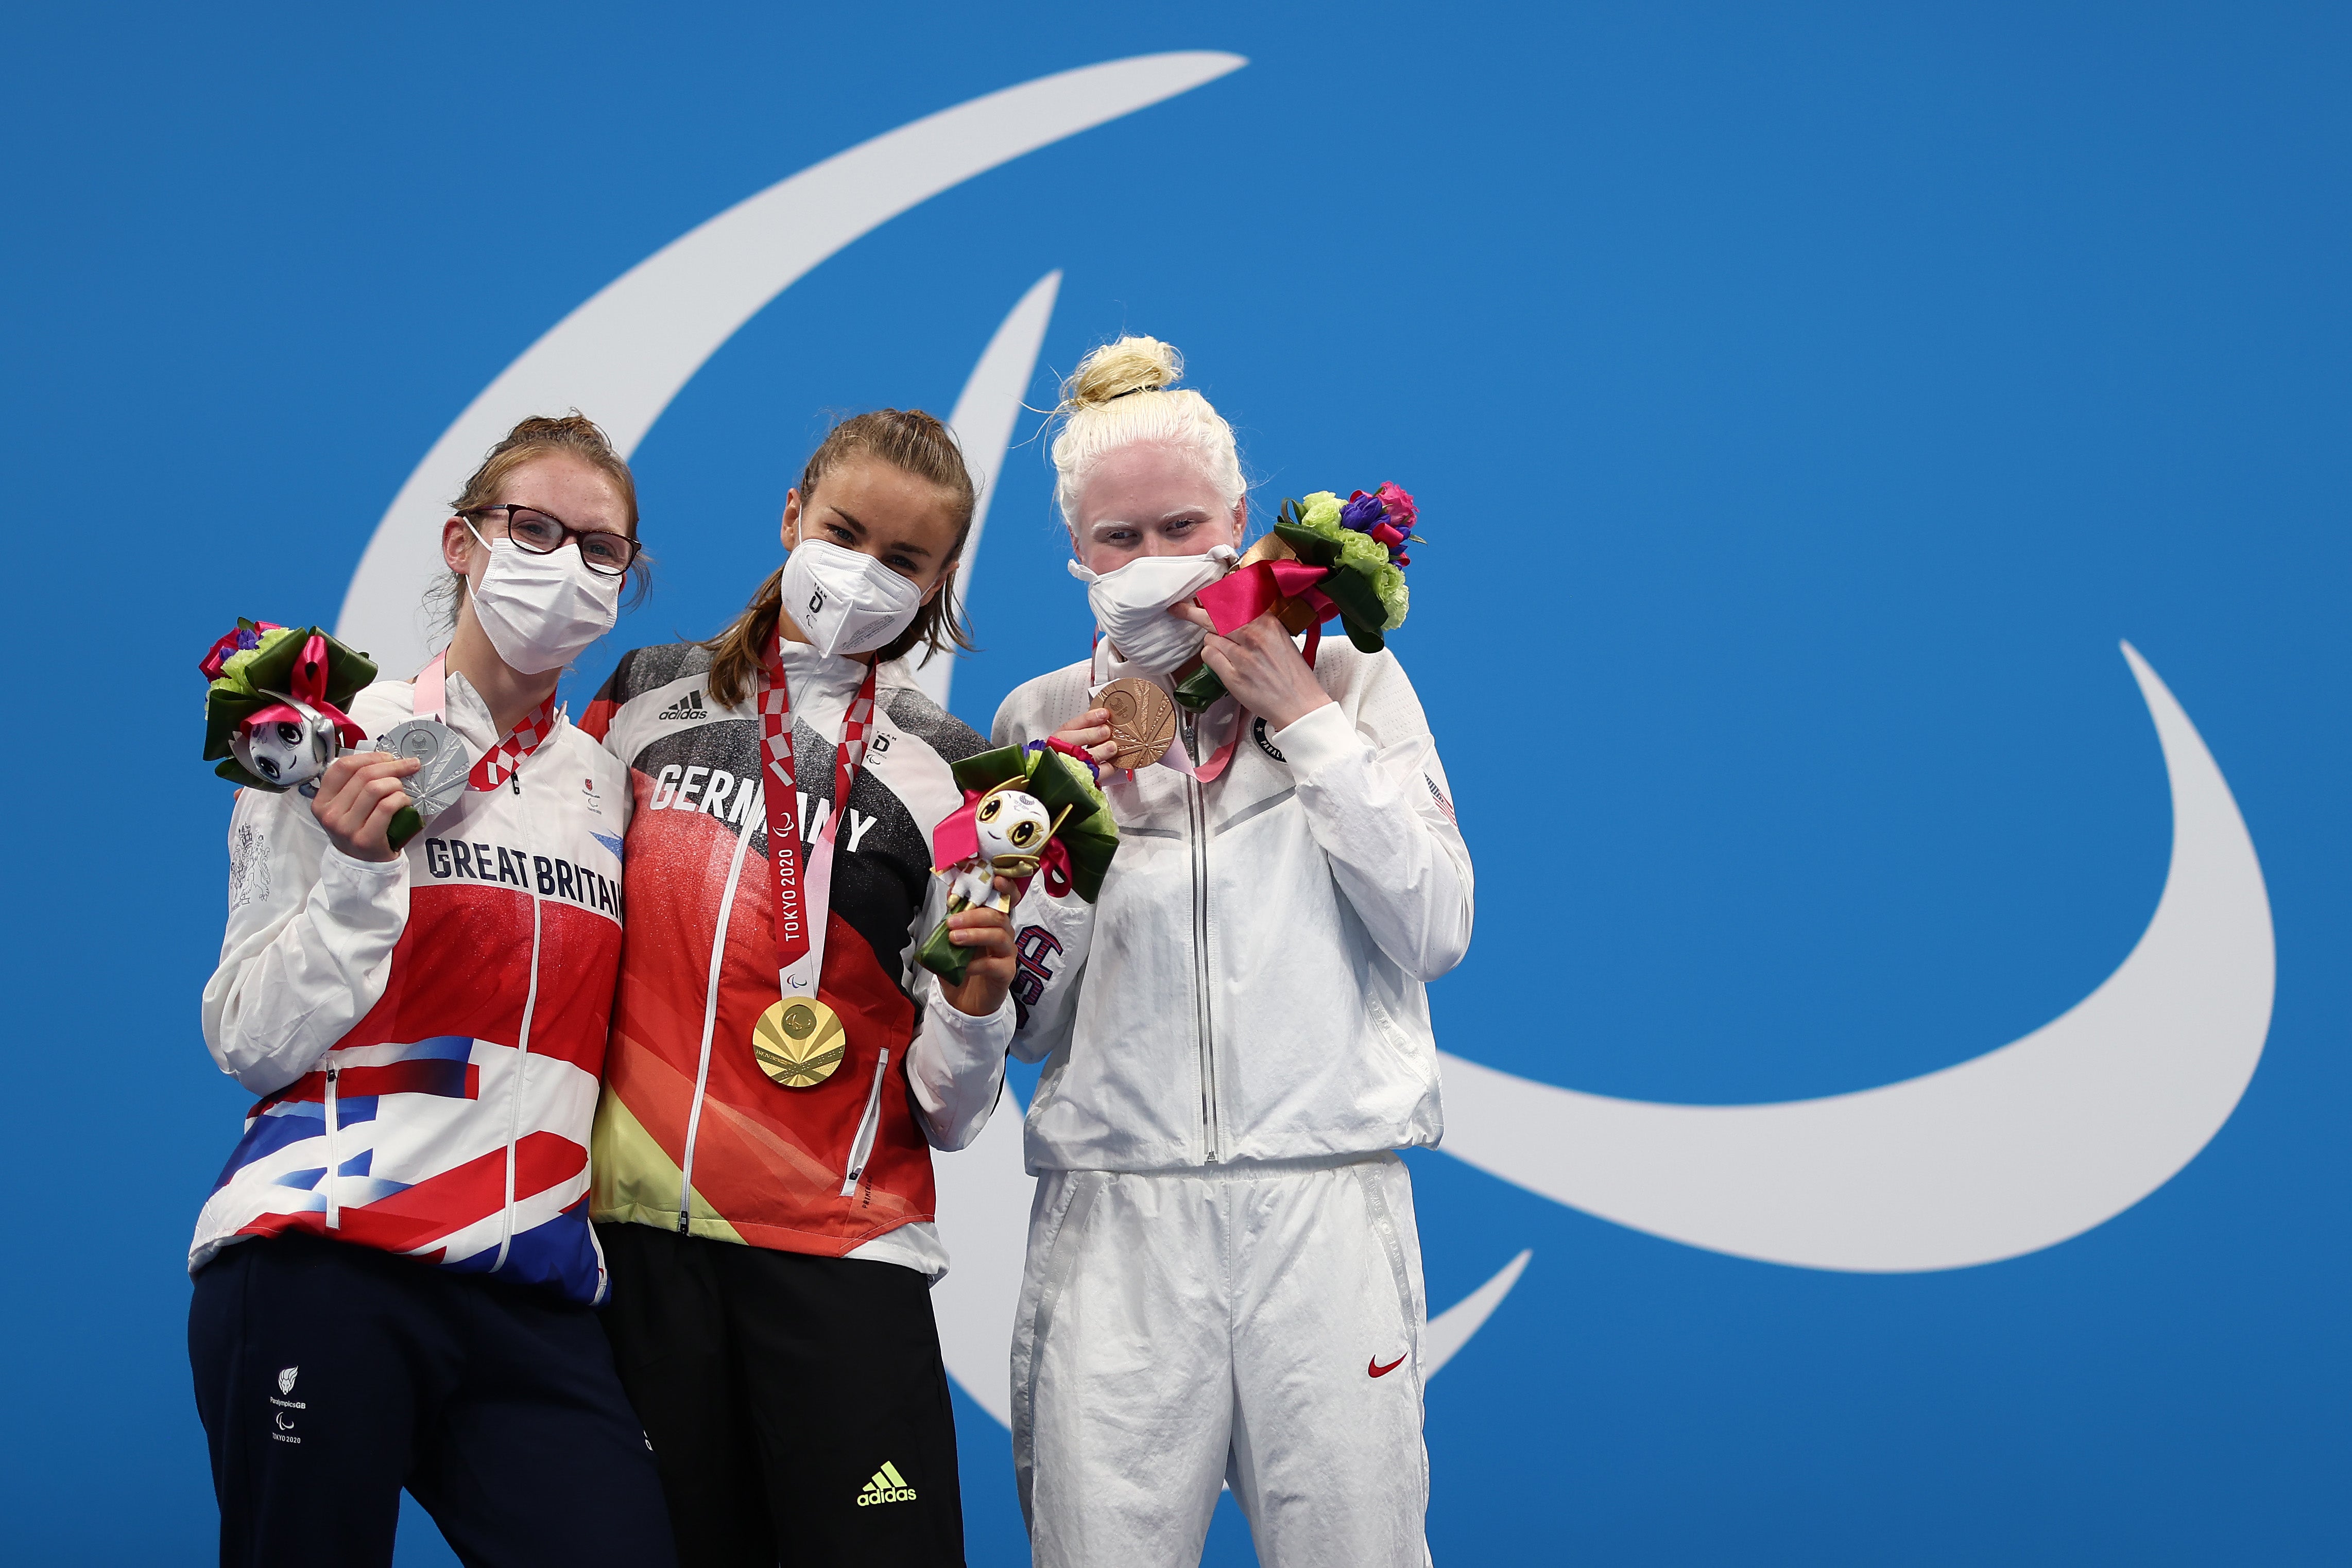 Redfern, left, with Elena Krawzow of Germany, who took gold, and Colleen Young of USA, who took bronze